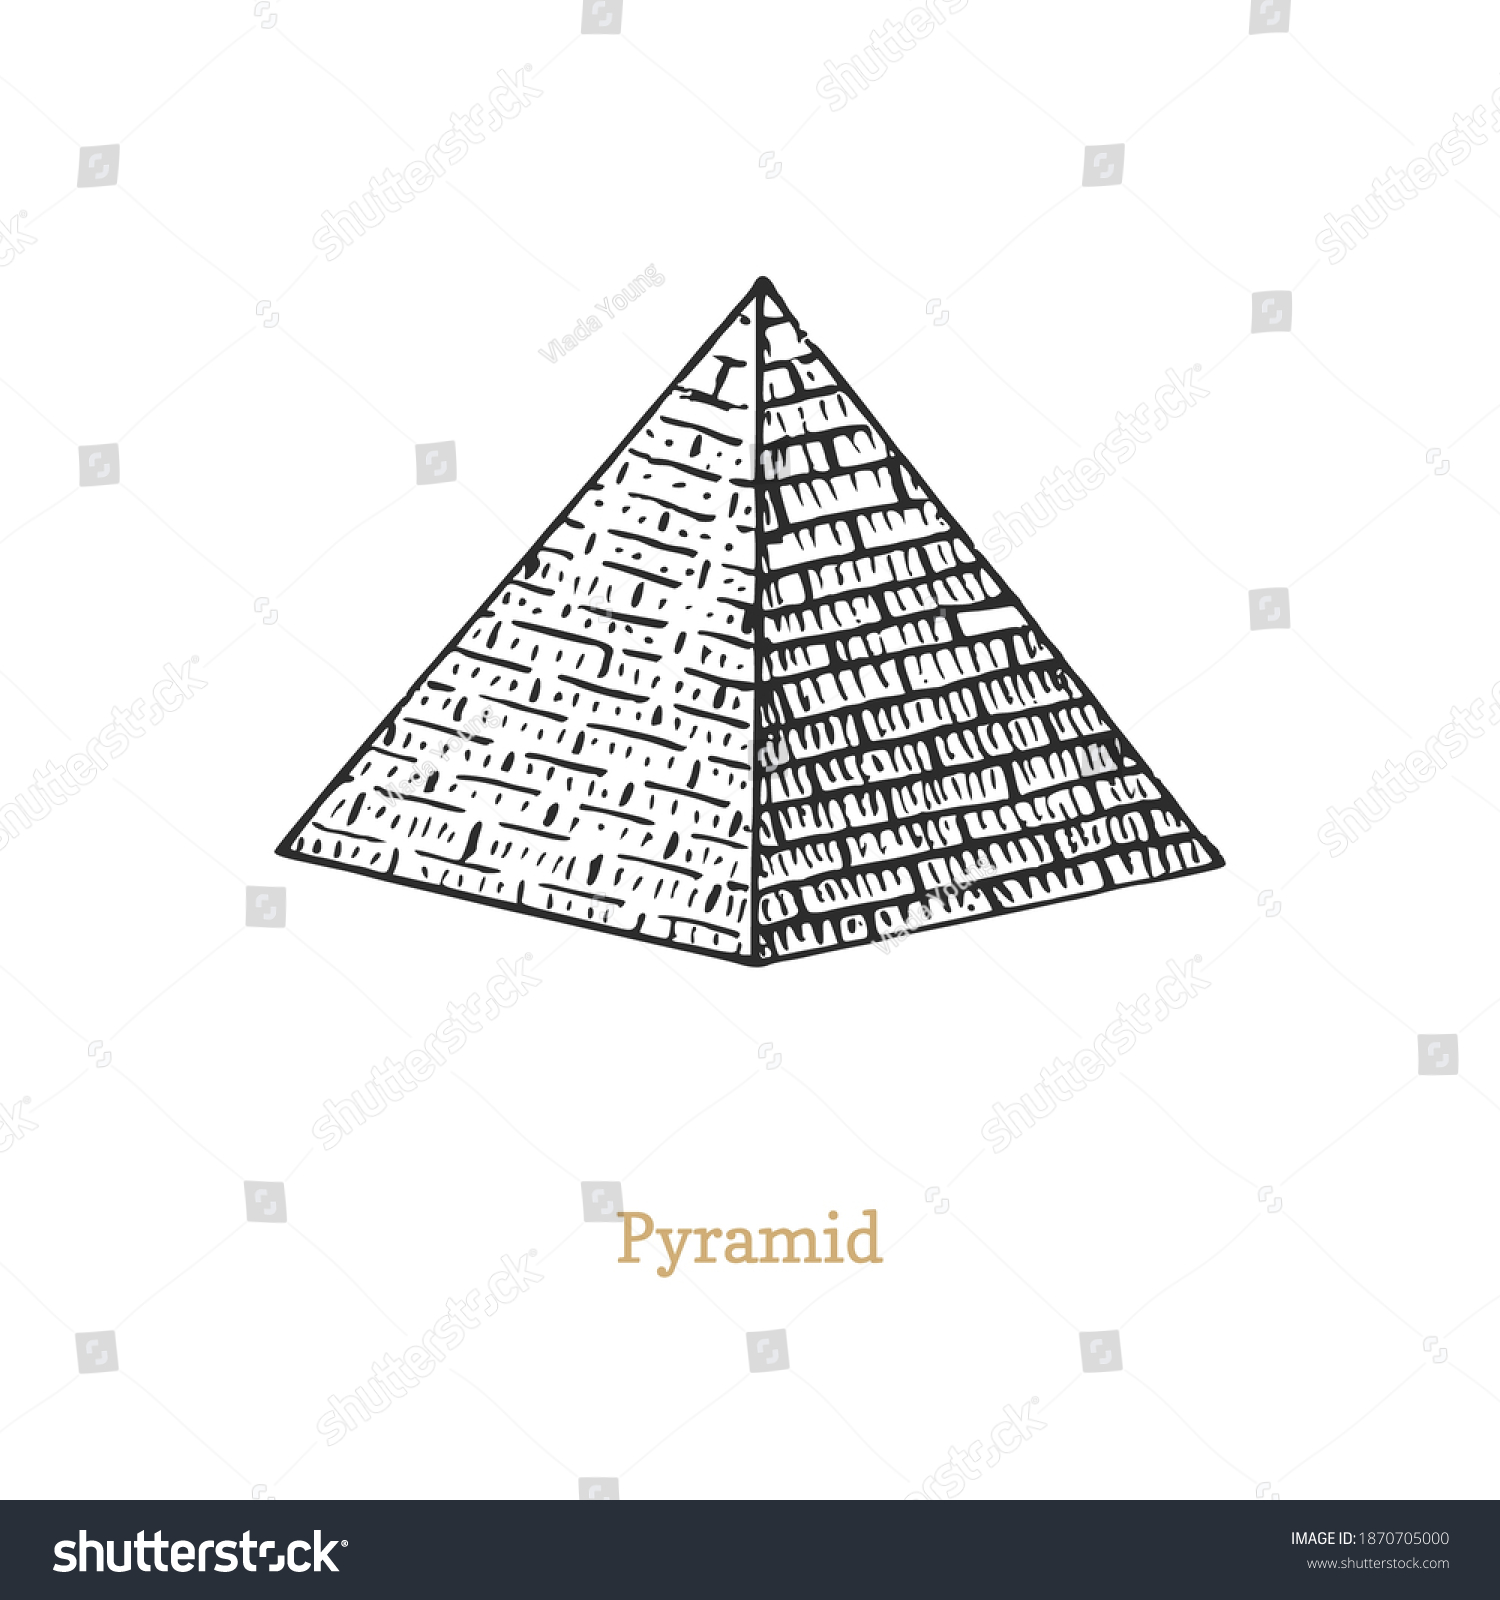 Pyramid Vector Illustration Engraving Style Vintage Stock Vector ...